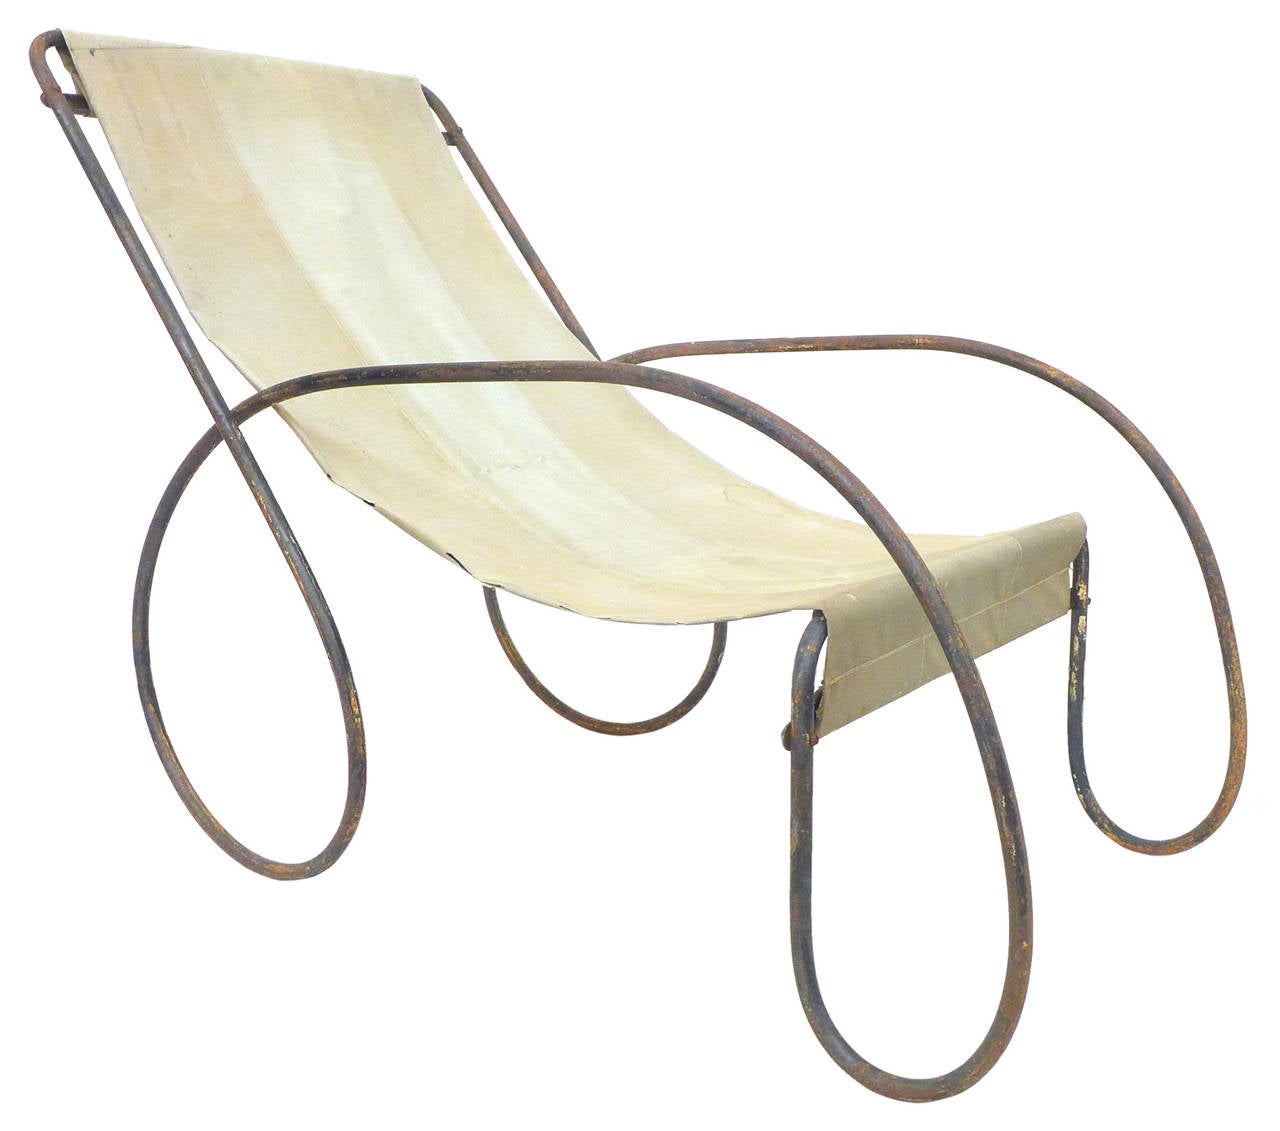 American Pair of Unusual Tubular Steel and Canvas Sling Lounge Chairs